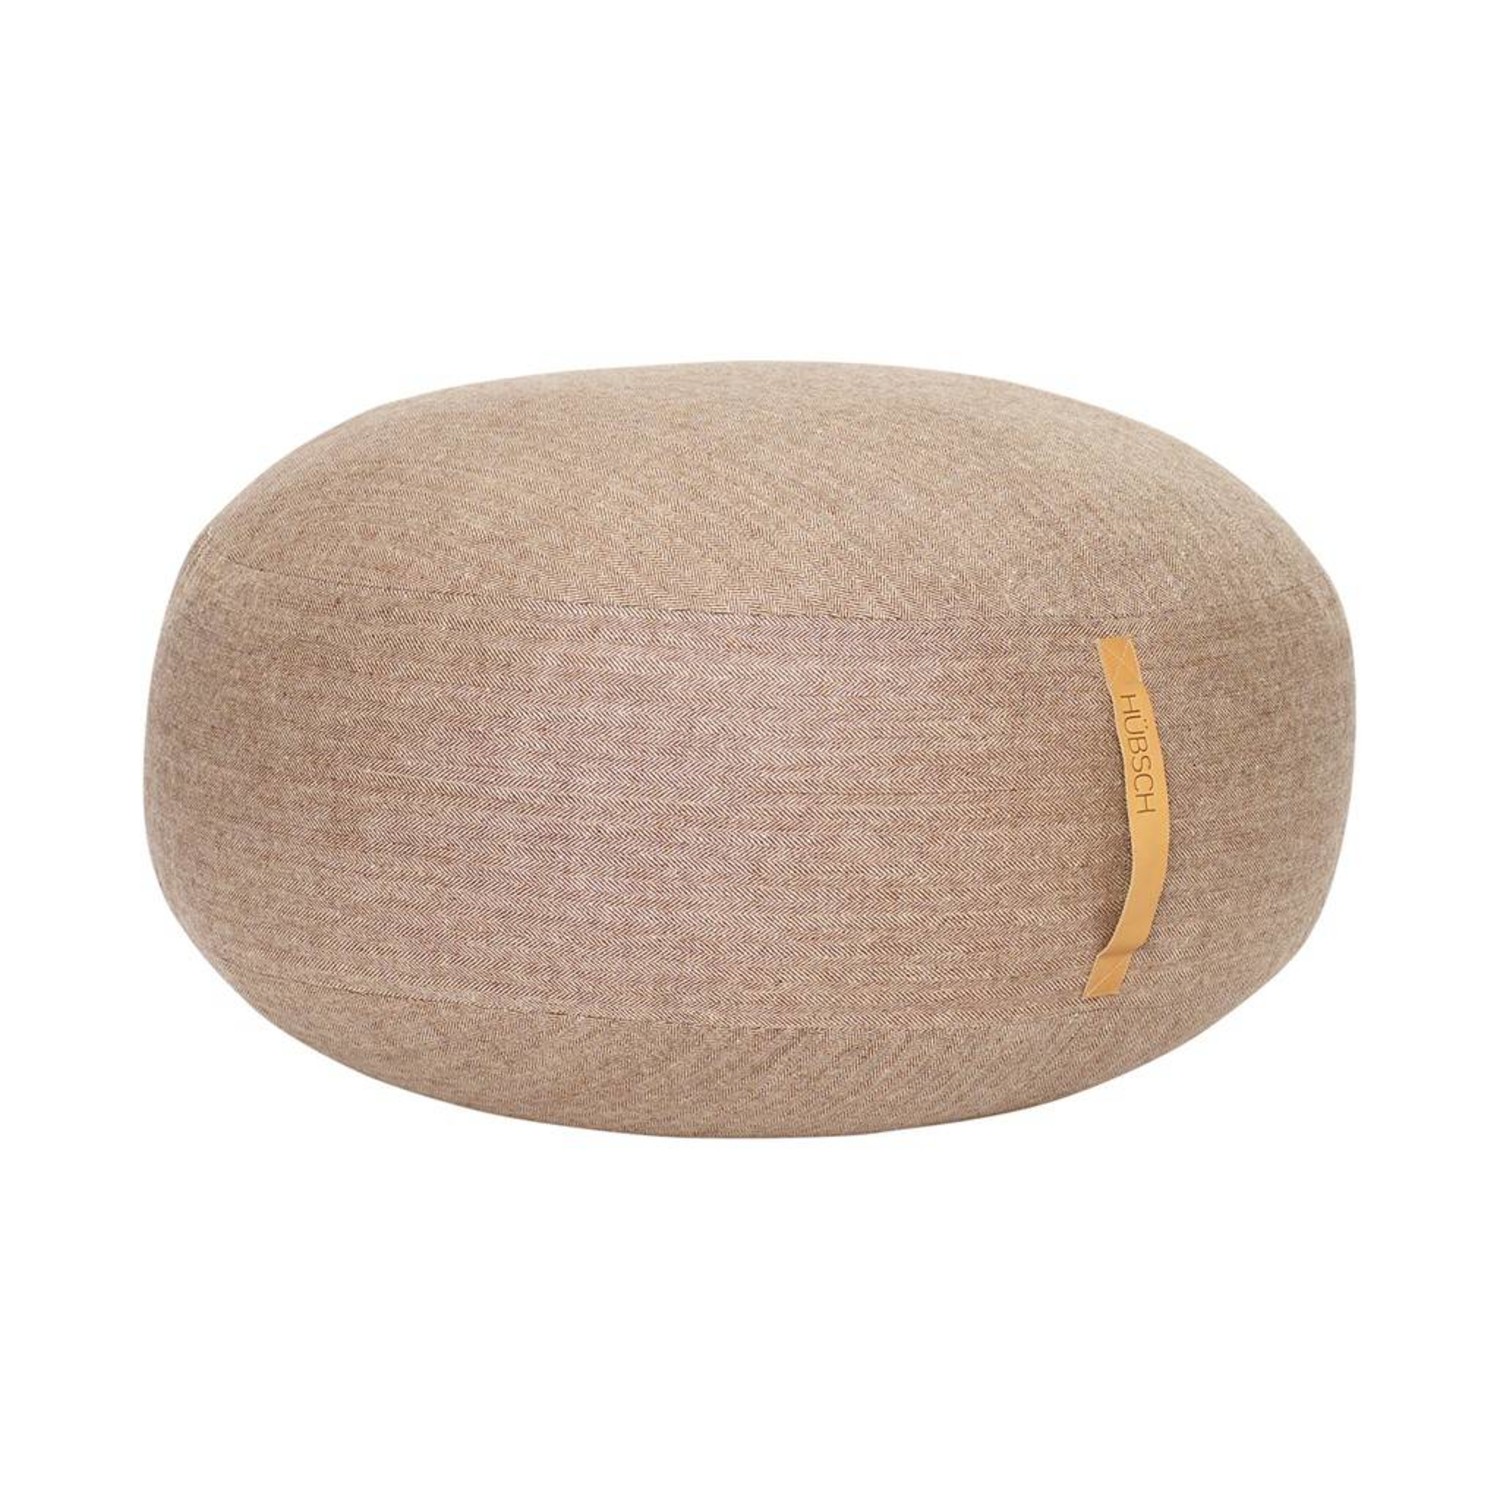 Hübsch brown pouf with leather strap - LIVING AND CO.